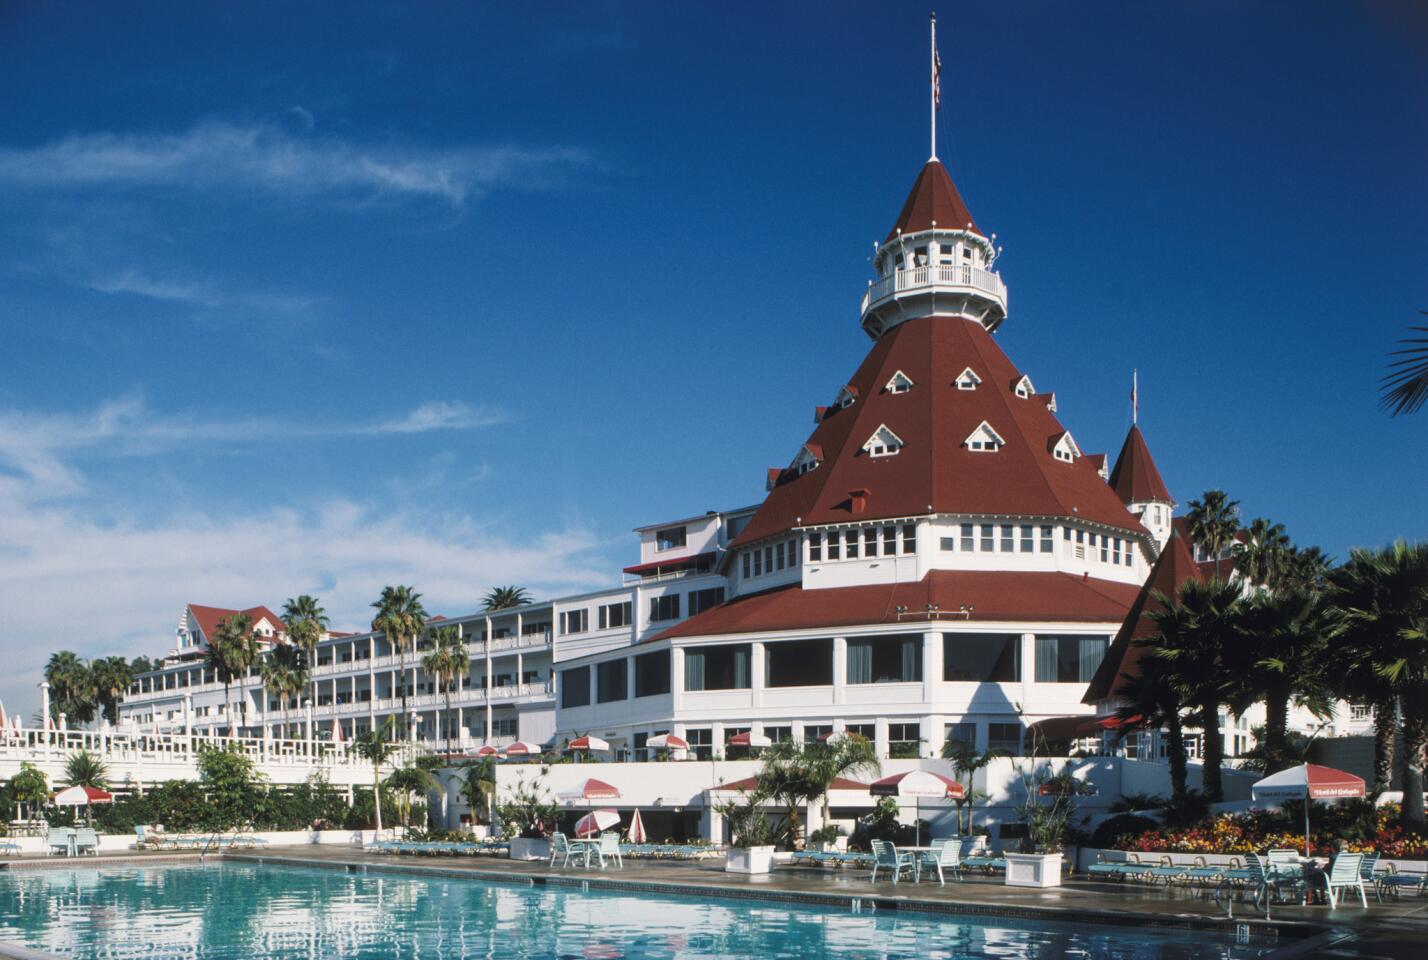 This National Historic Landmark offers a multitude of activities including biking, paddle boarding, surfing lessons, and golf. Guests can also enjoy some finger-licking fun at the signature Beach S’mores Roast, with jumbo marshmallows, fresh fruit and Ghiradelli chocolate.